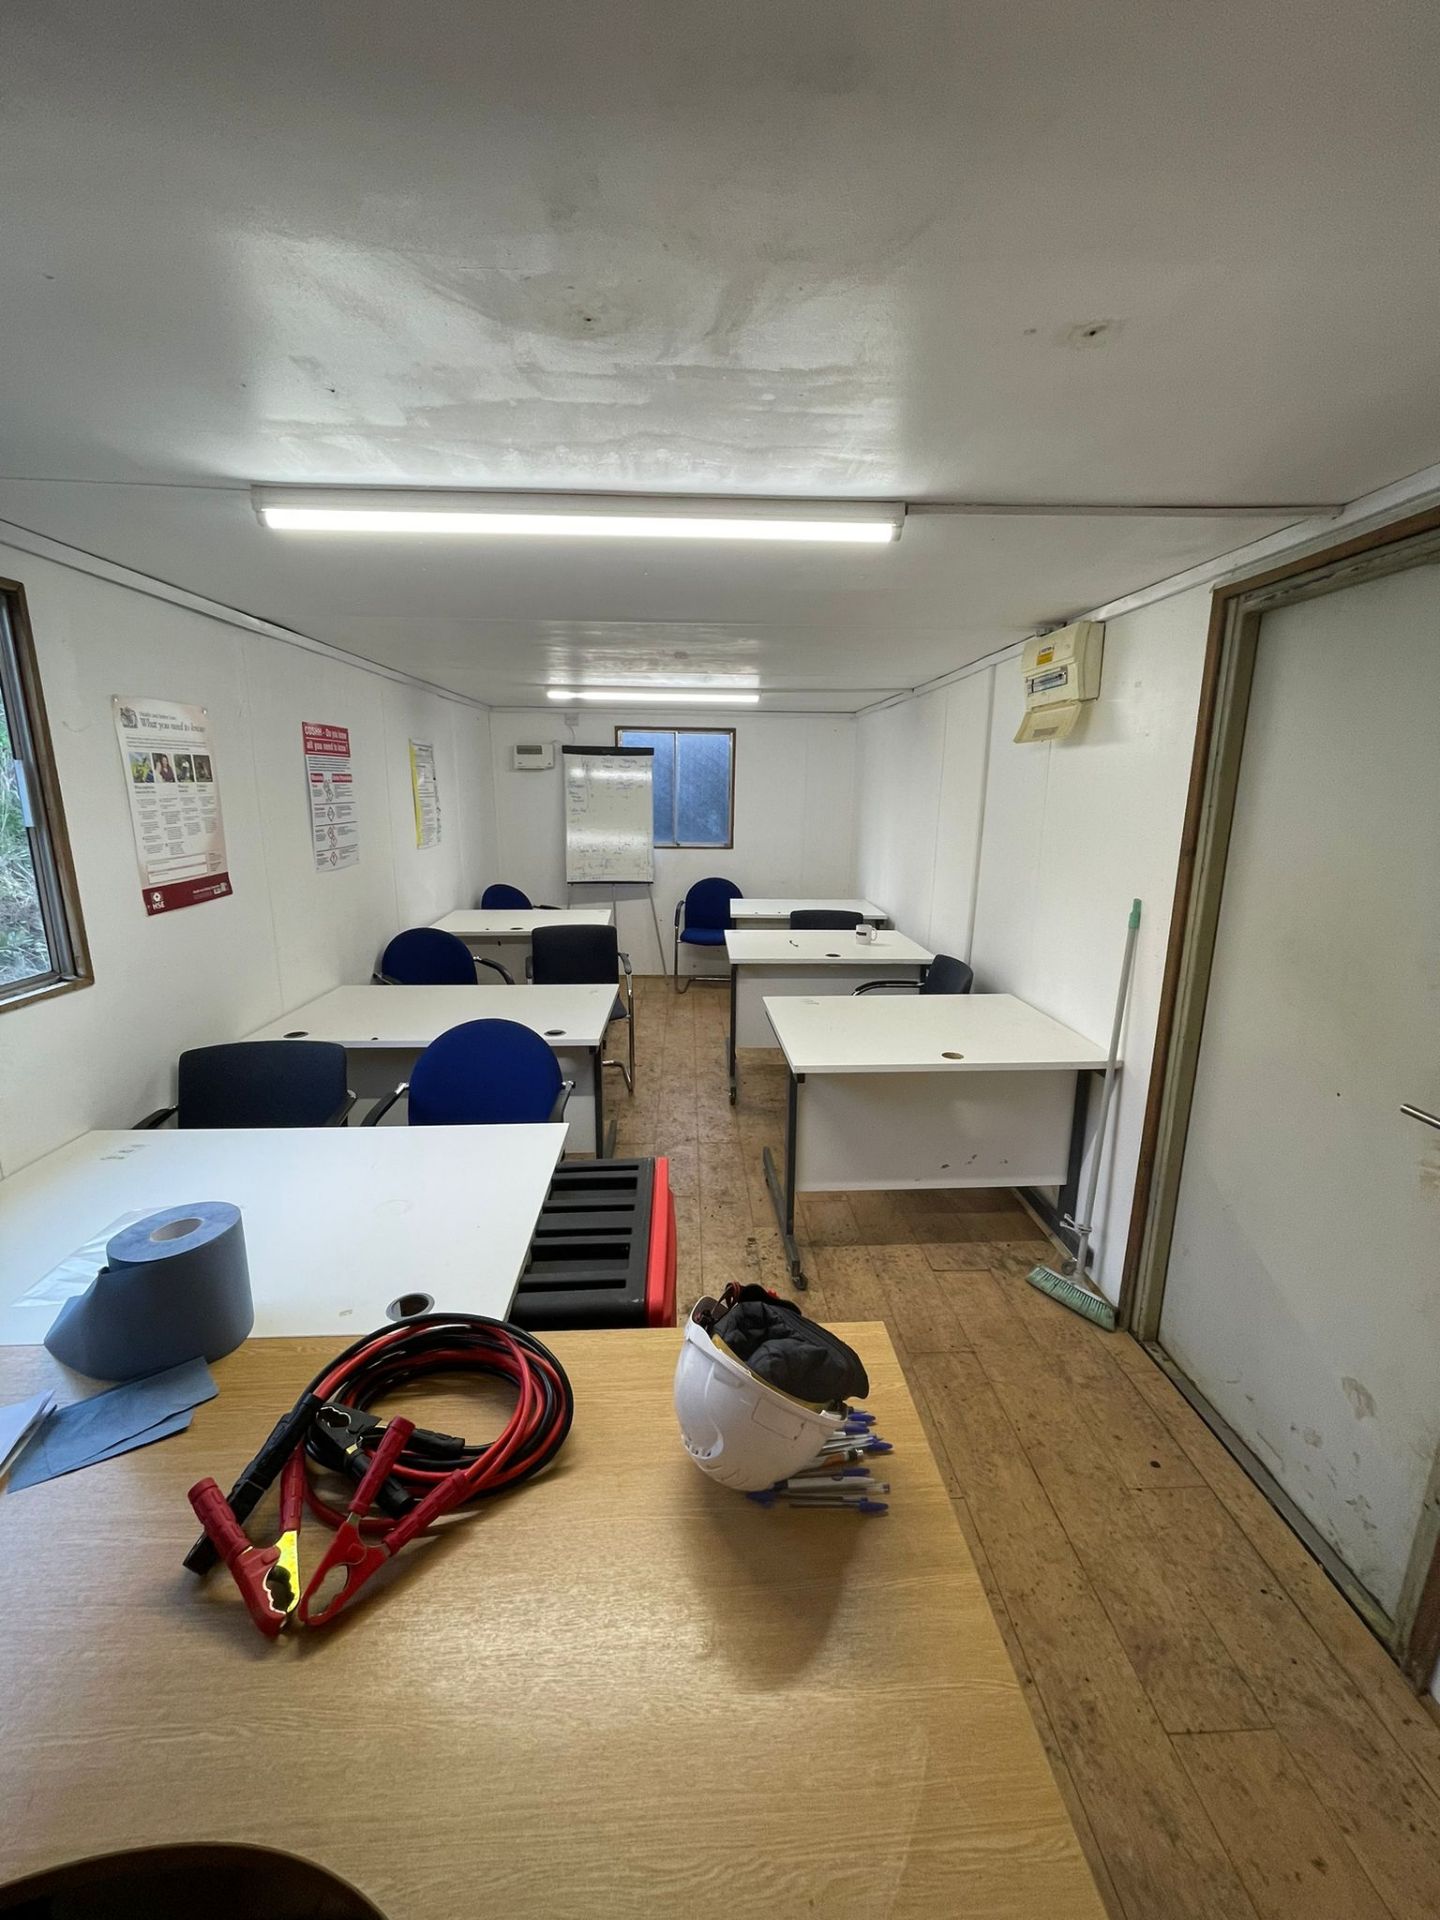 32FT X 10FT ANTI-VANDAL CABIN - OFFICE/ TRAINING ROOM AND SMALL CANTEEN AREA. - Image 4 of 8